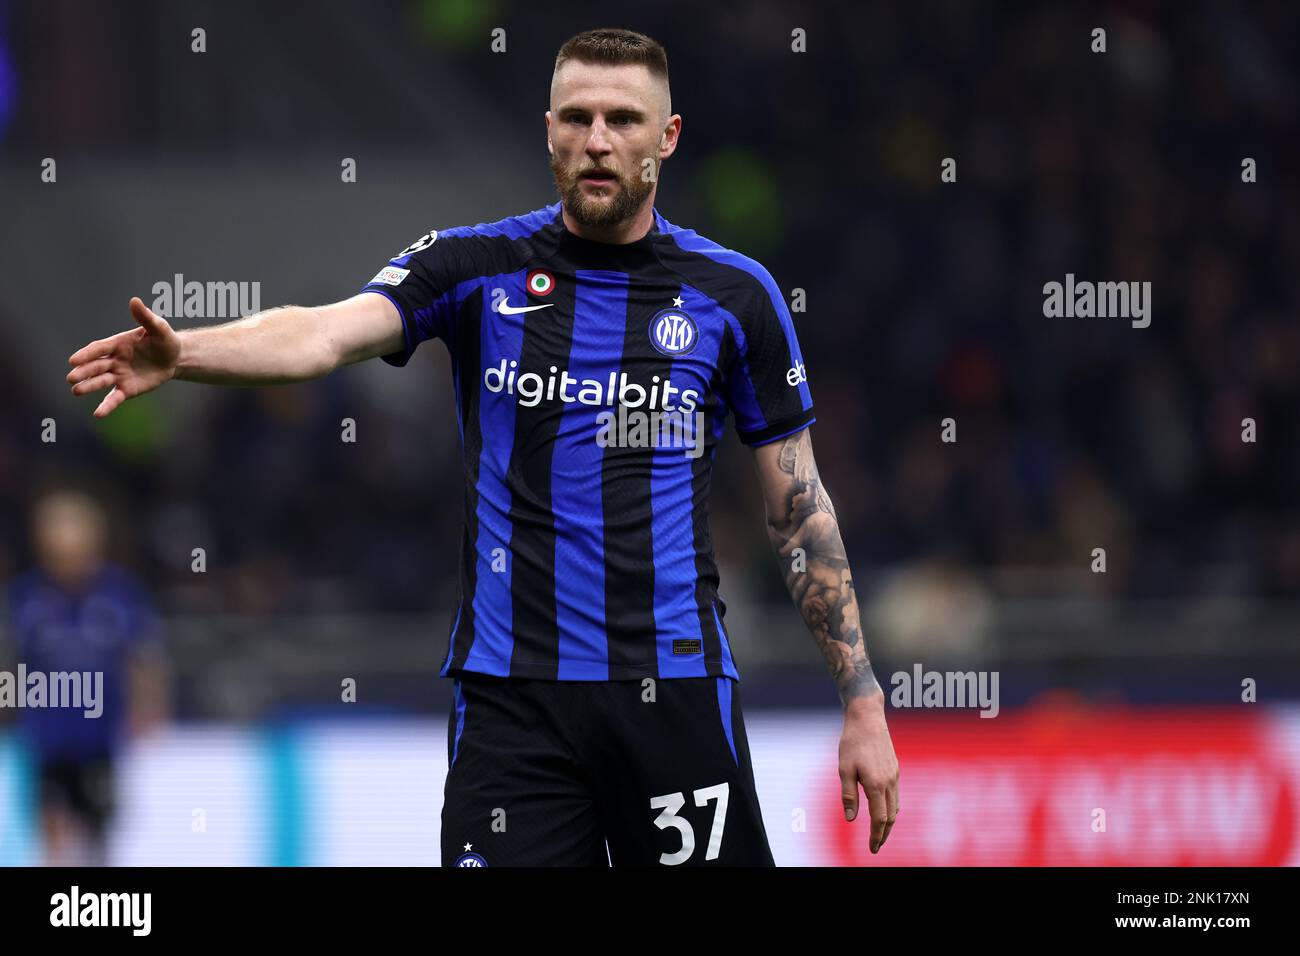 Milano Italy . February 22, 2023, Milan Skriniar of Fc Internazionale gestures during the Uefa Europa League Group C match between Fc Internazionale and Fc Porto at Stadio Giuseppe Meazza on February 22, 2023 in Milano Italy . Stock Photo